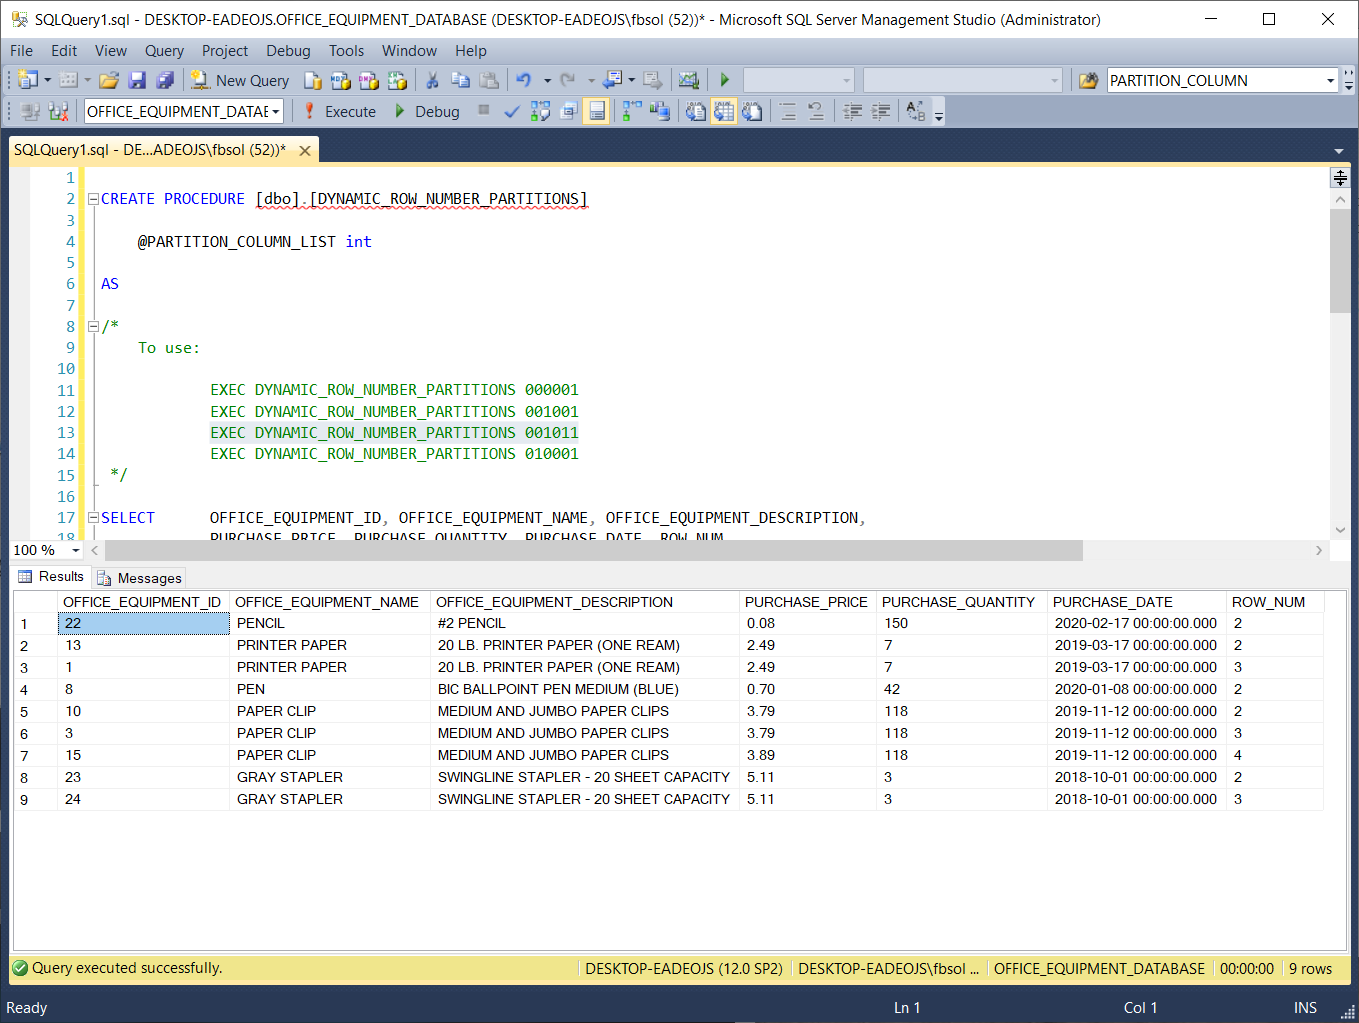 Testing the DYNAMIC_ROW_NUMBER_PARTITIONS stored procedure, with a T-SQL EXEC statement.